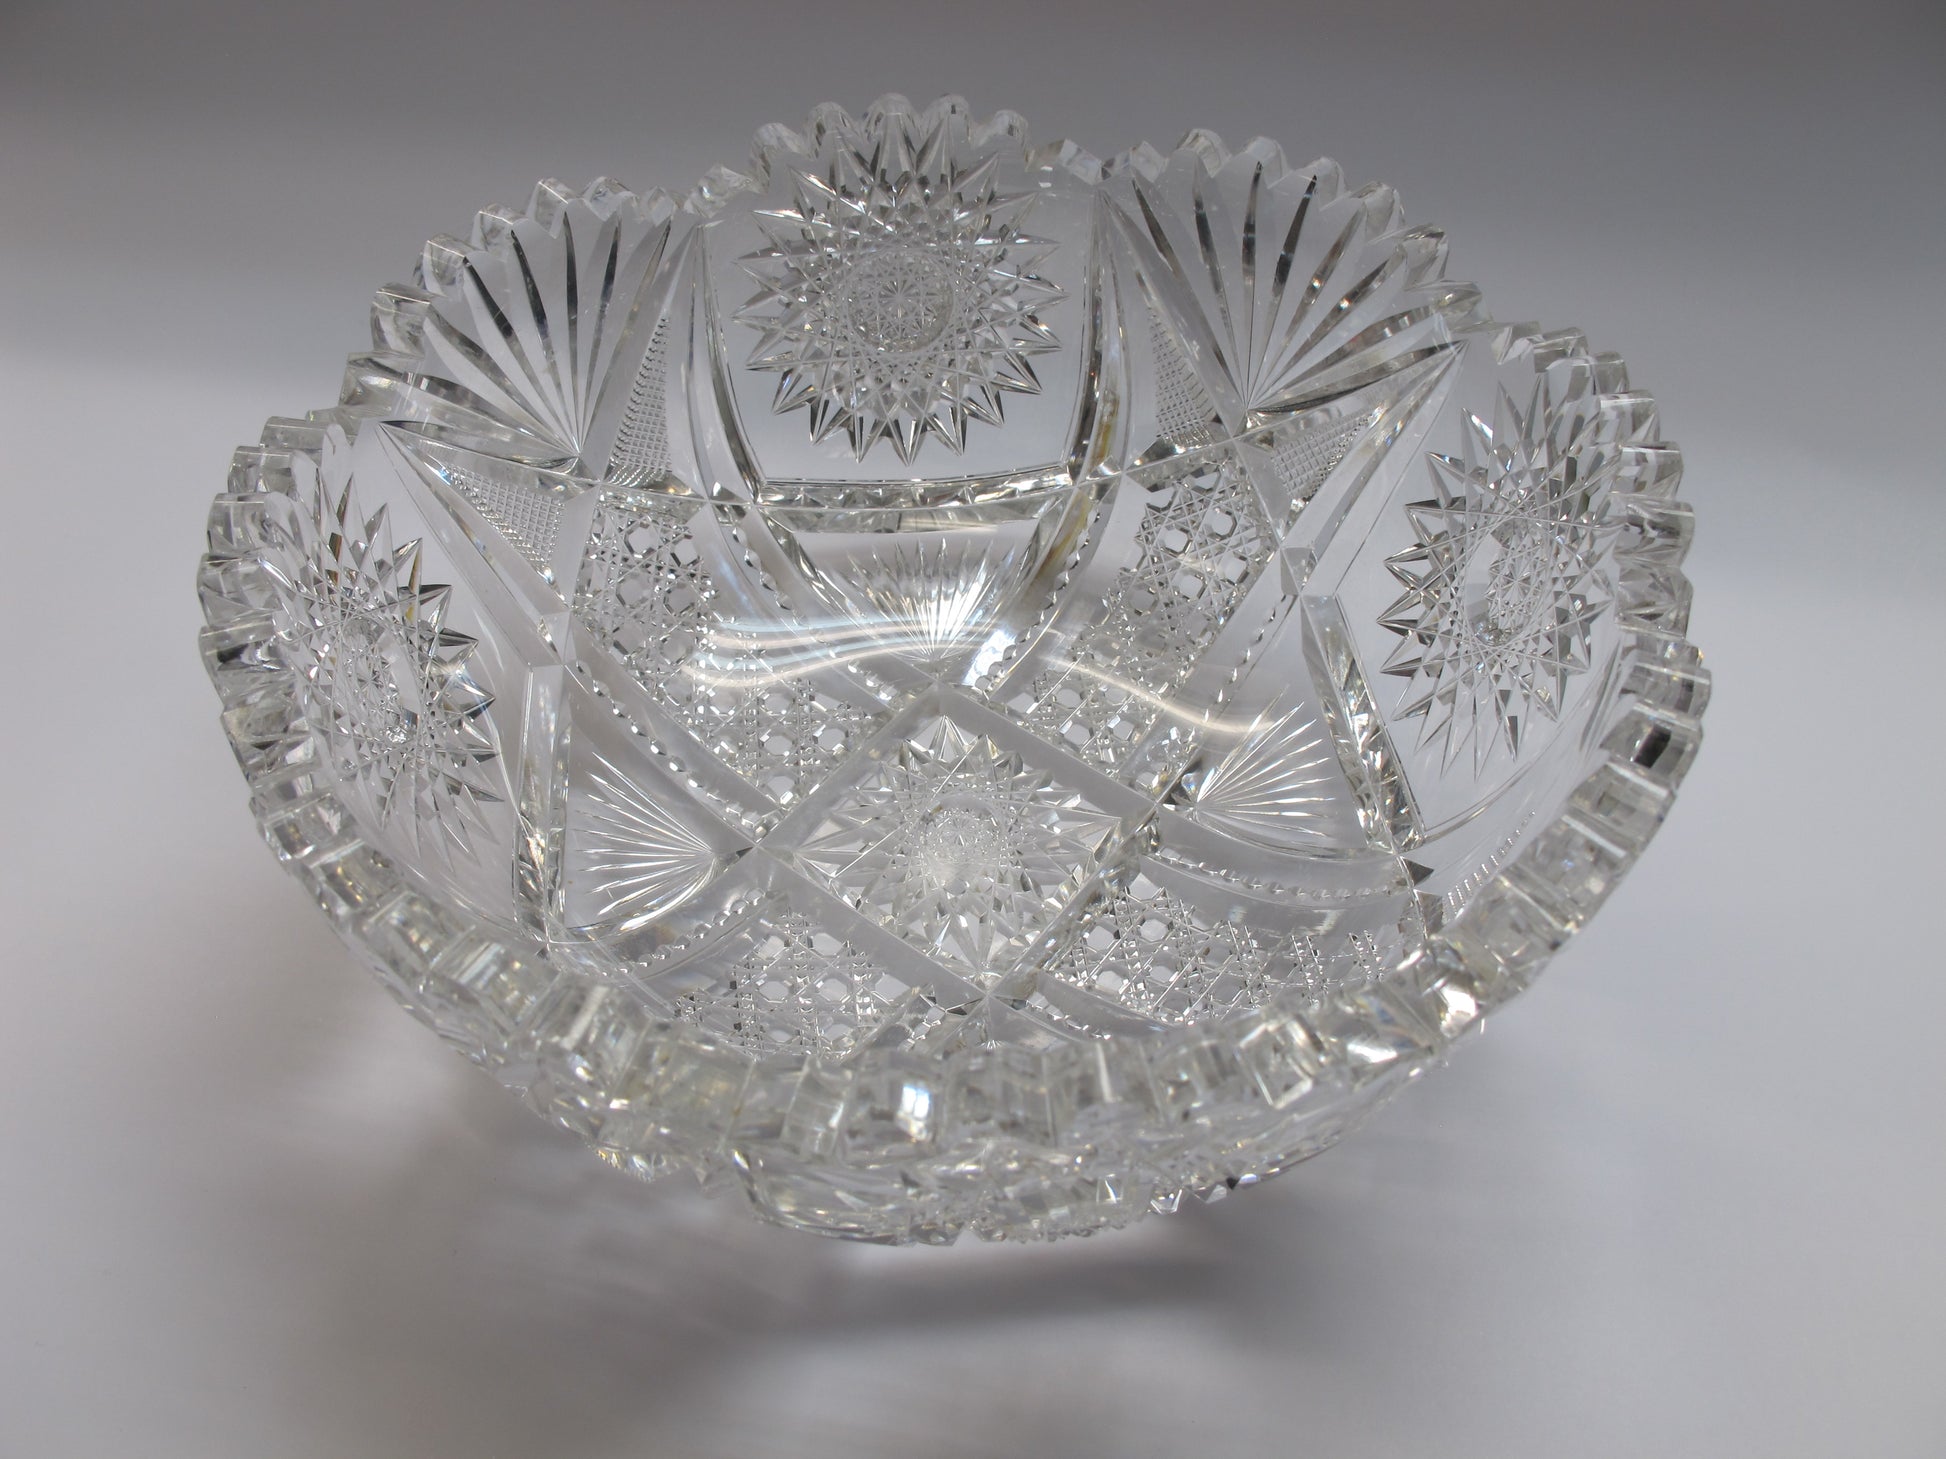 American Brilliant Period Cut Glass ABP Antique 8.25" bowl - O'Rourke crystal awards & gifts abp cut glass